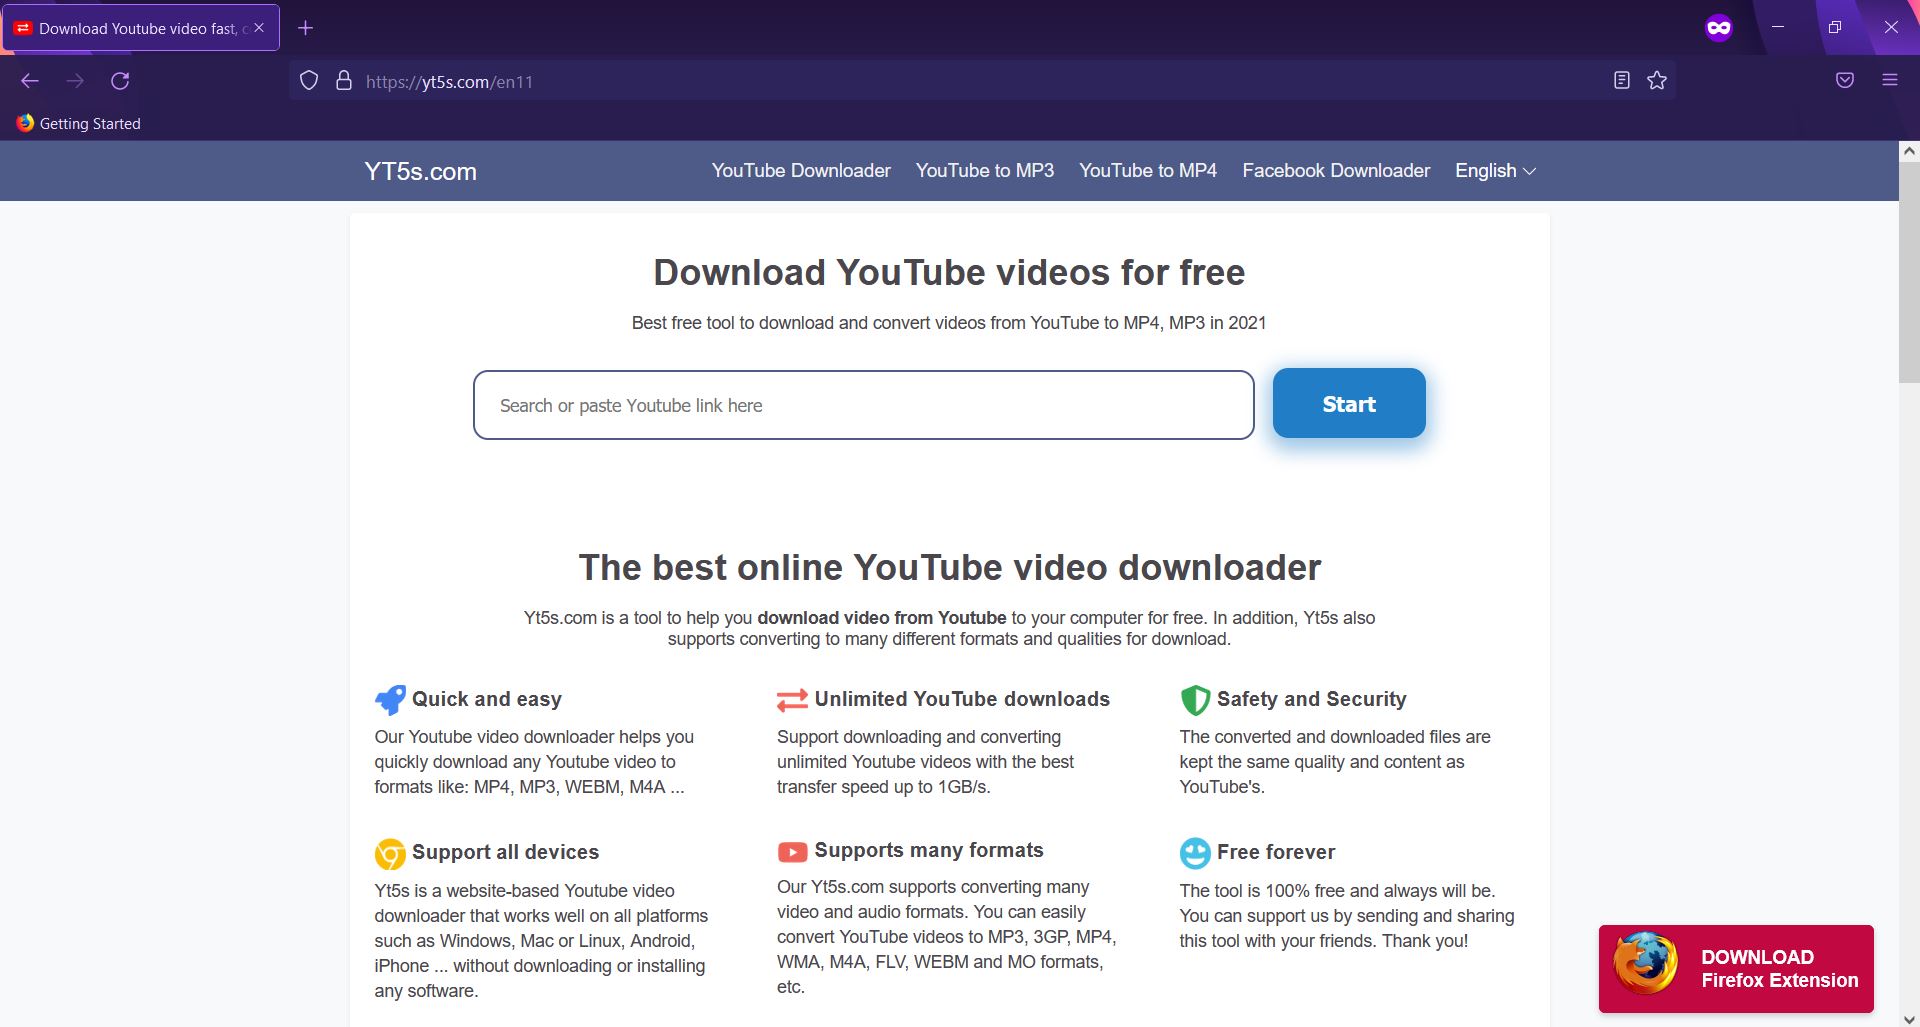 how Yt5s.com appears in an affected web browser